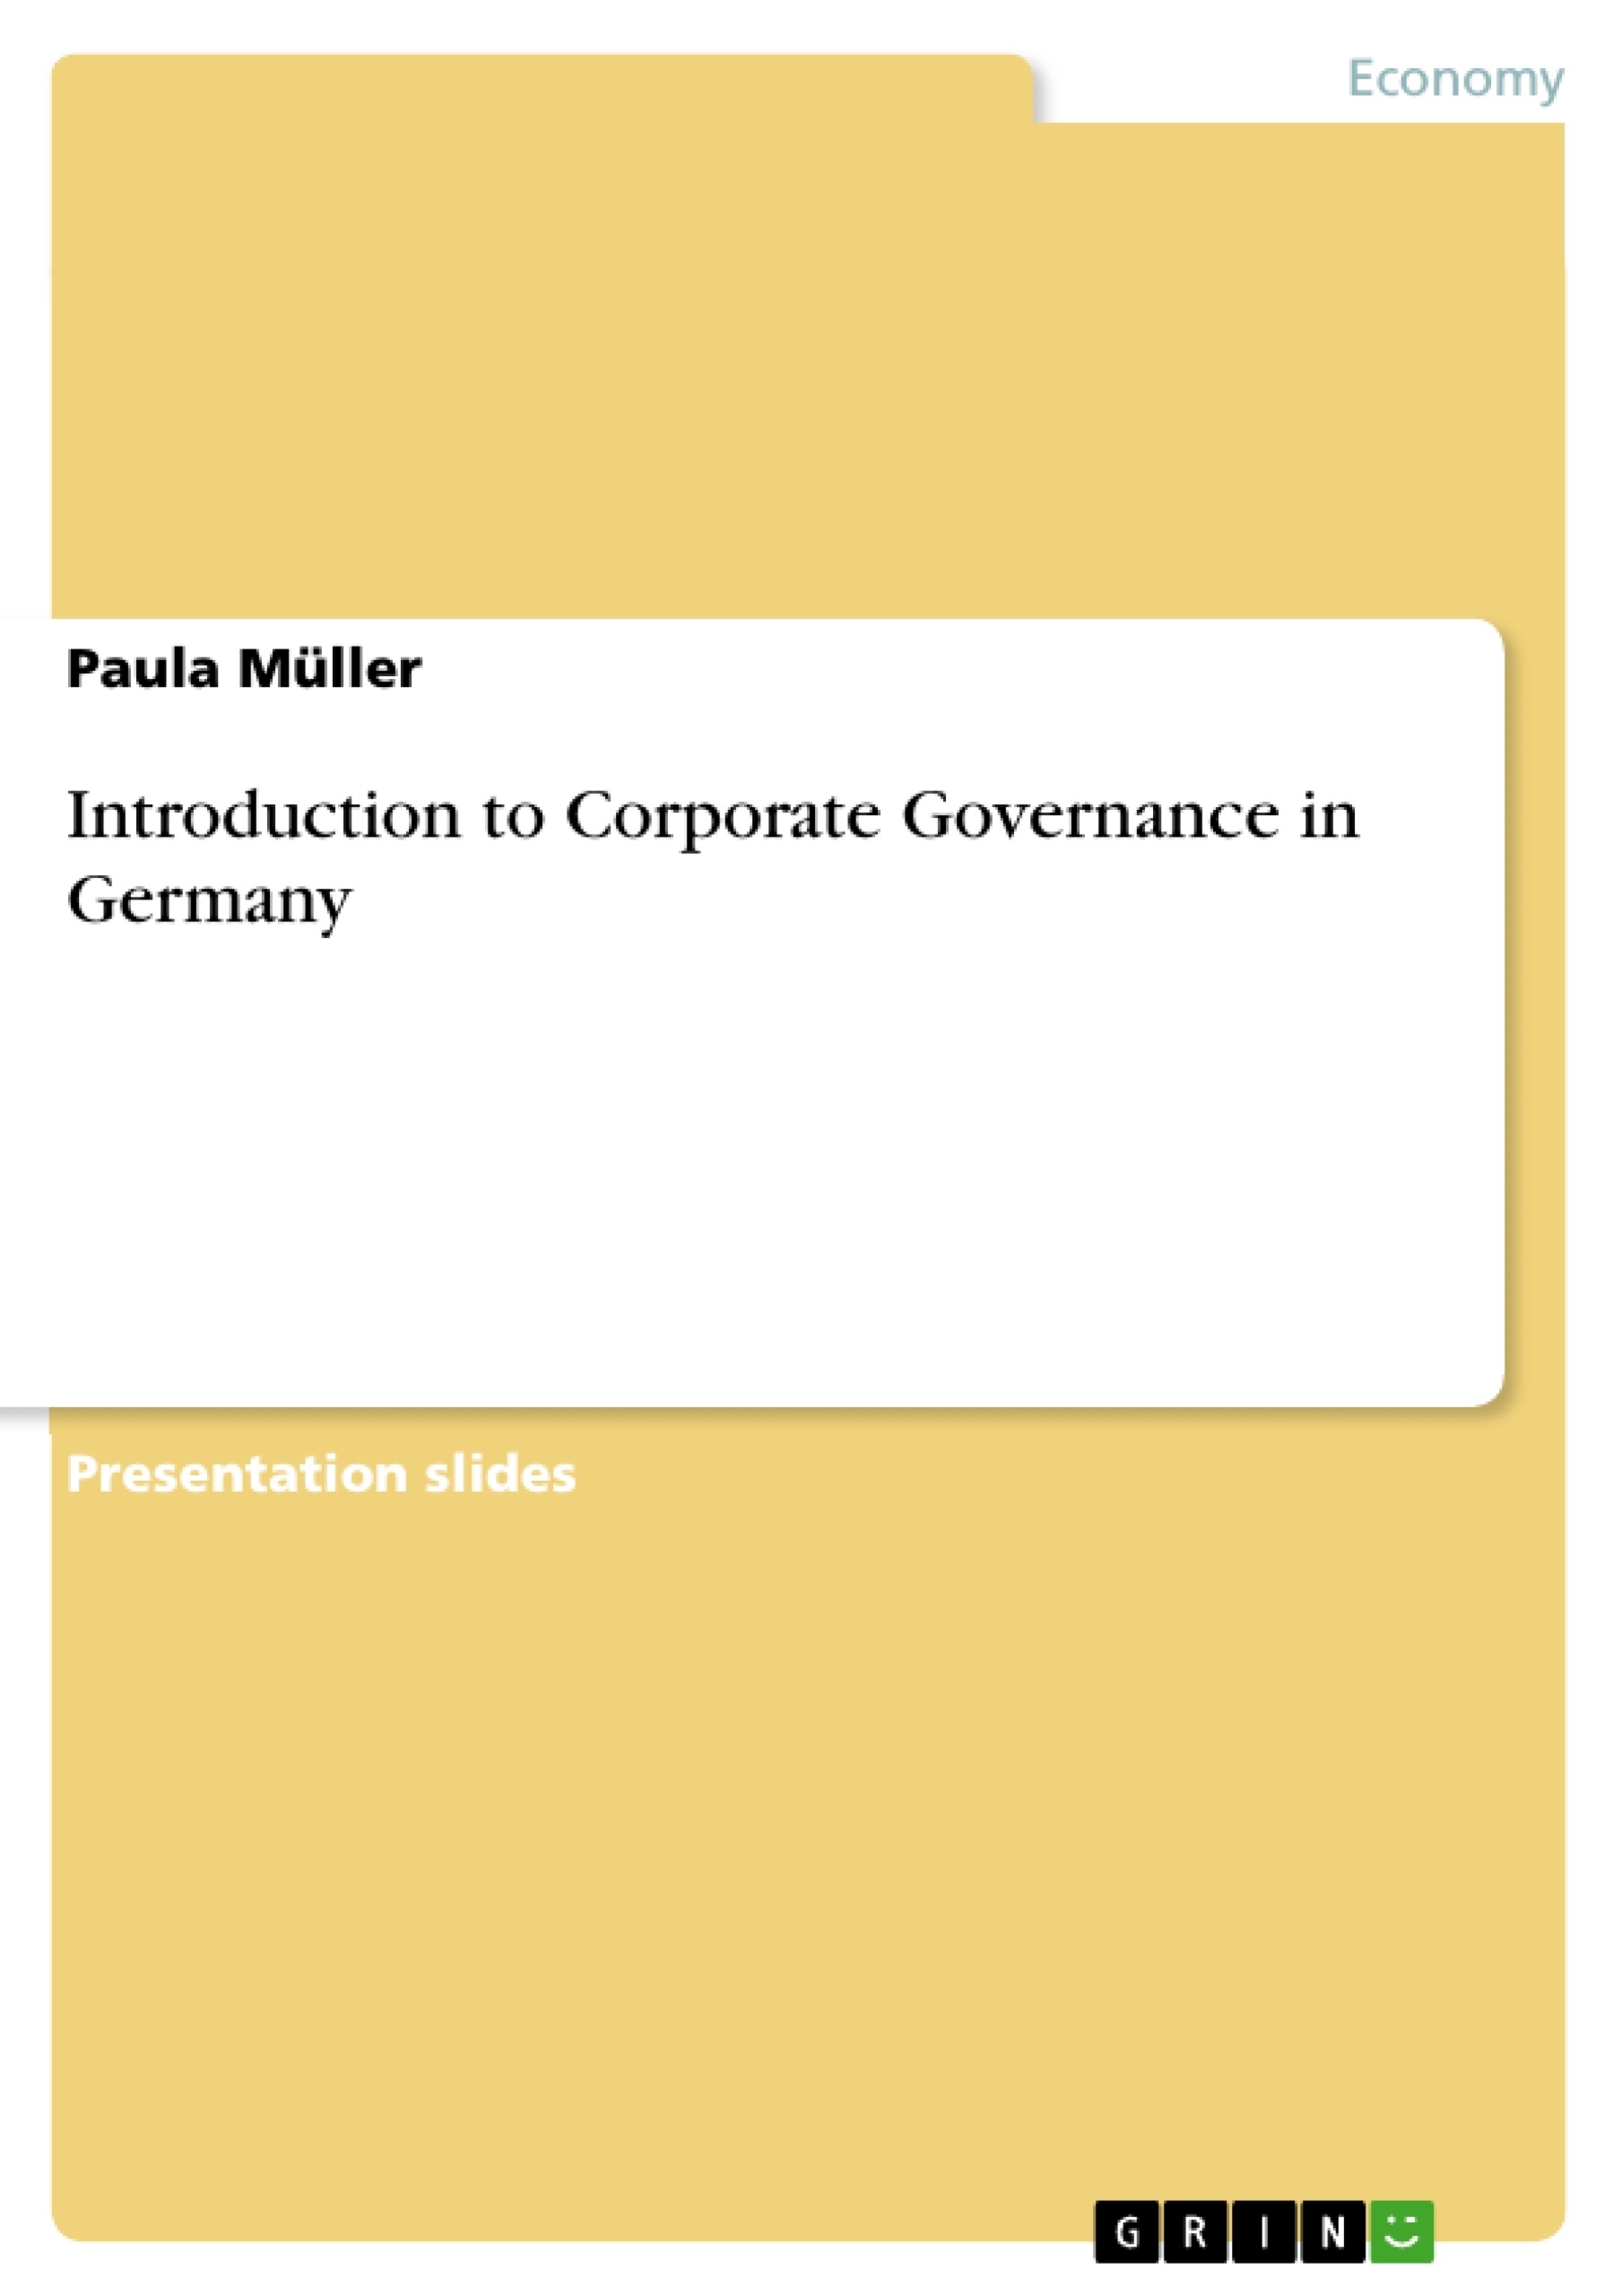 Title: Introduction to Corporate Governance in Germany